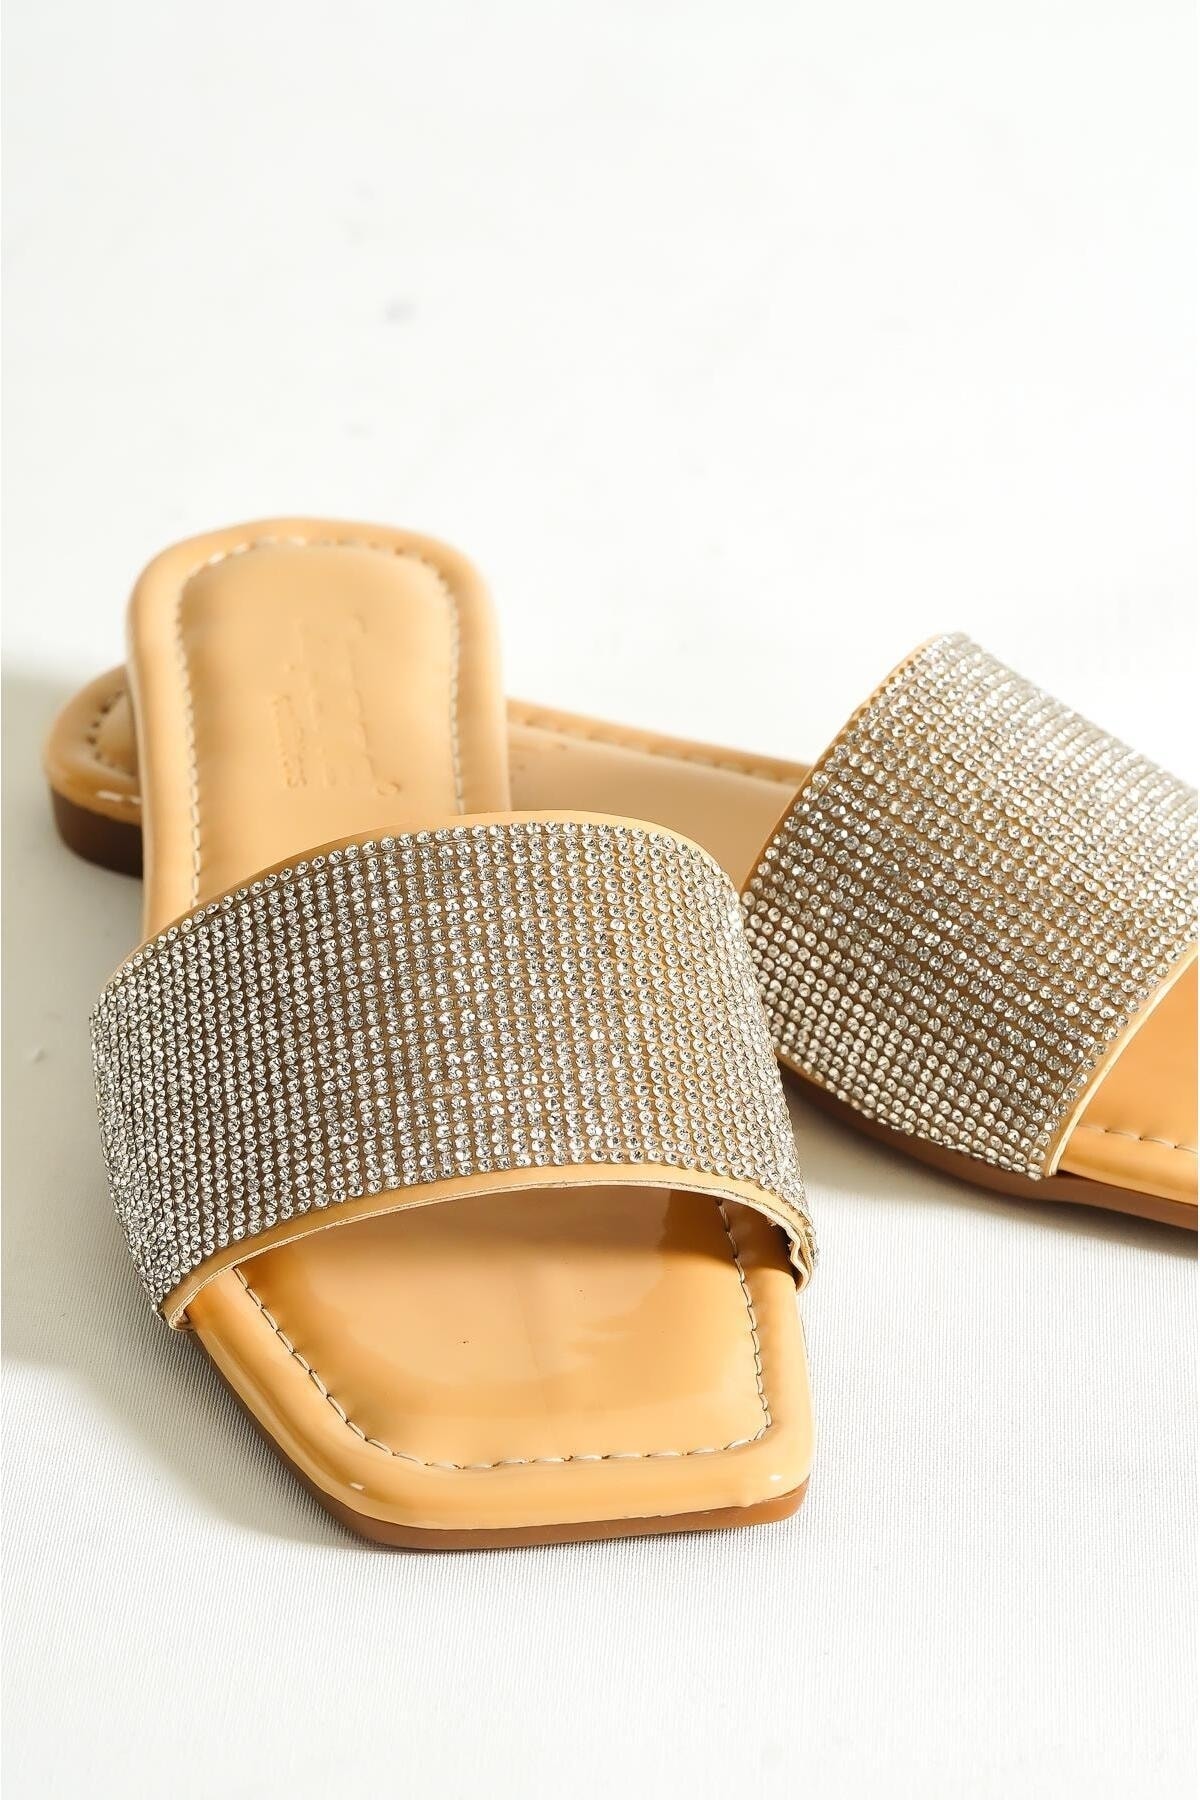 Levně Capone Outfitters With Capone Stones, Single Strap, Flat Heel, Quilted Nude Women's Slippers.